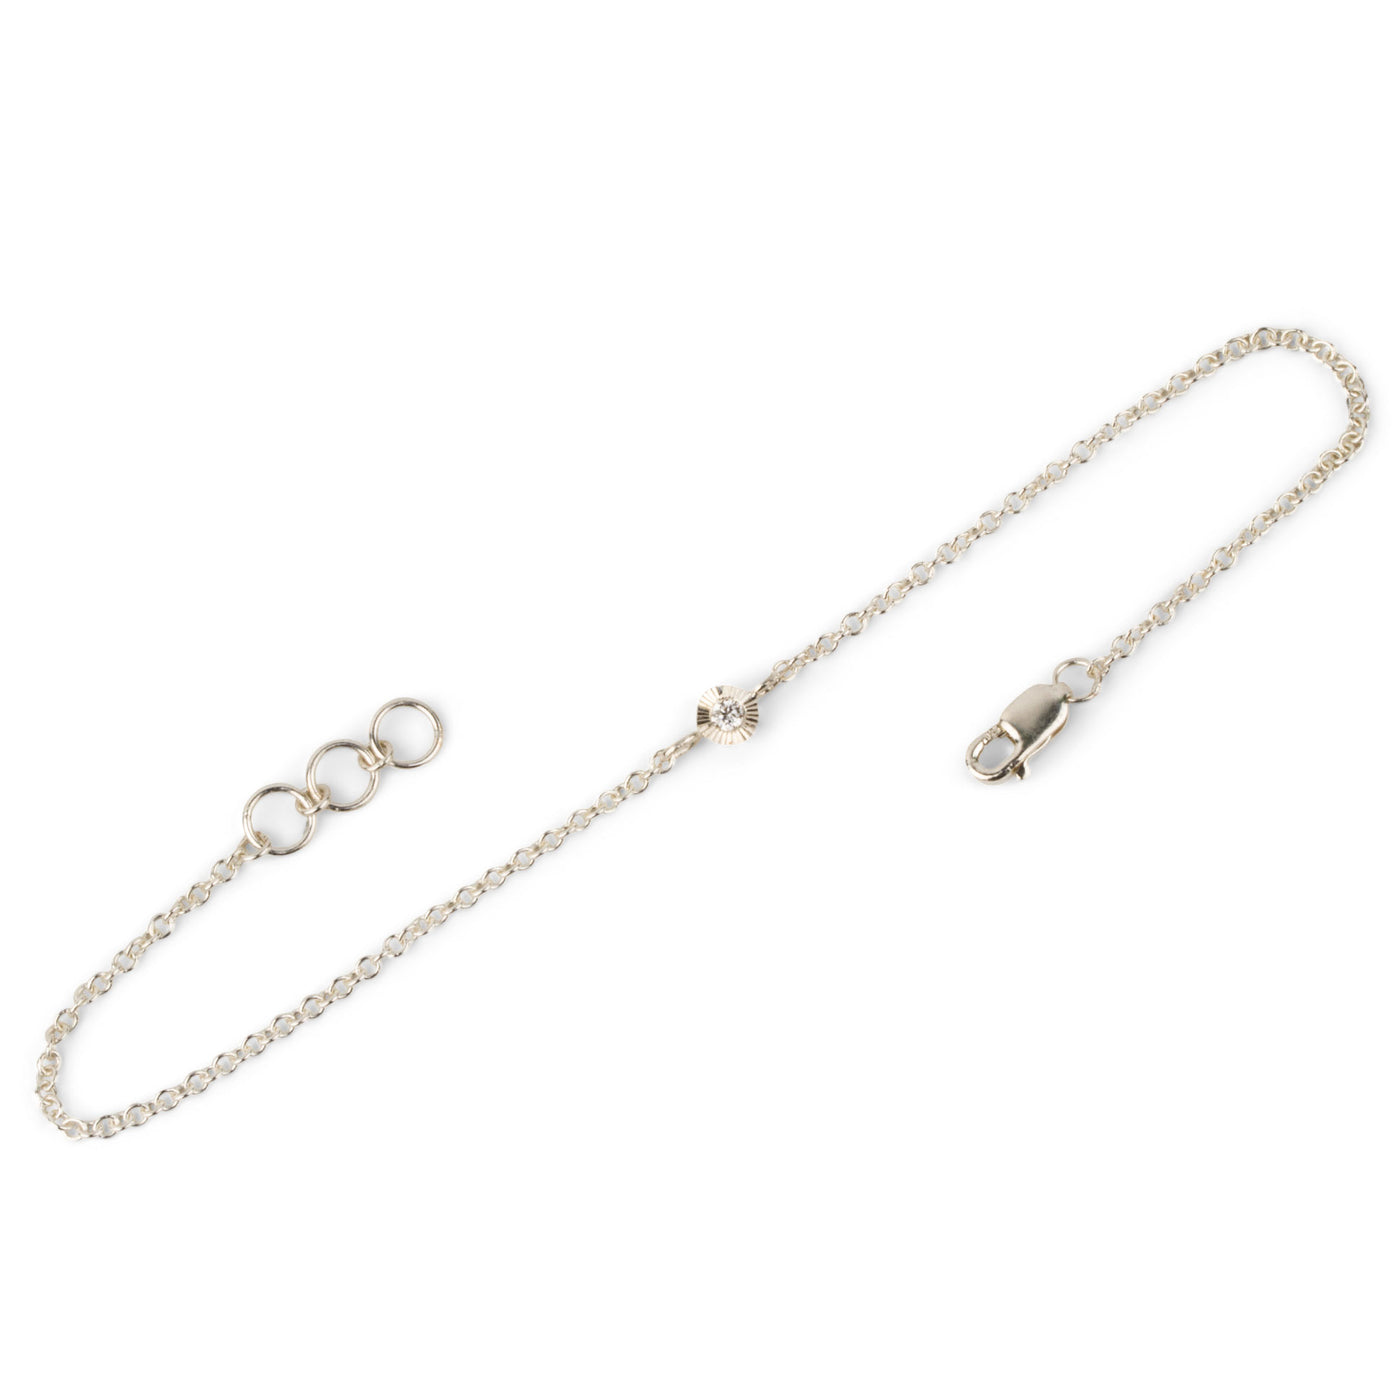 Small Aurora Chain Bracelet with Diamond in Sterling Silver